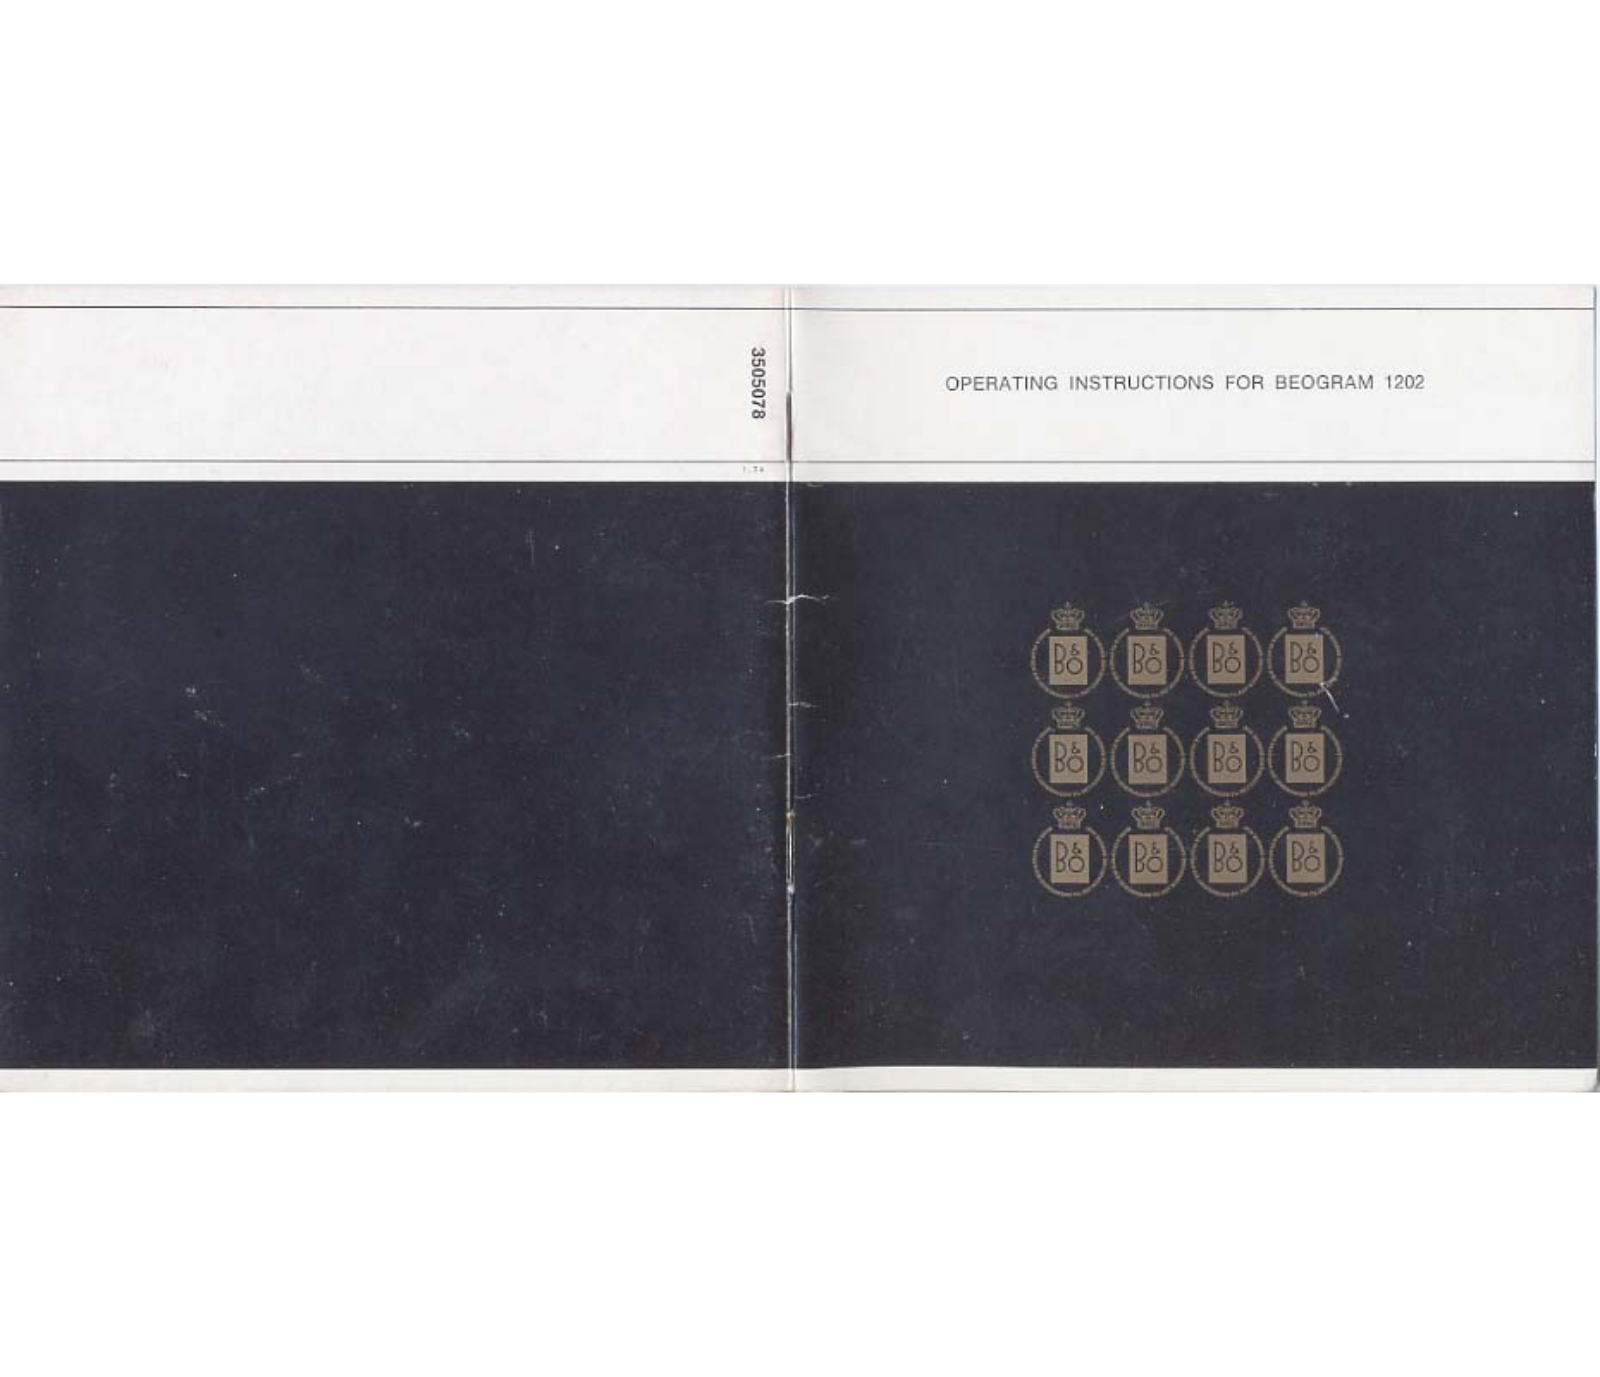 Bang and Olufsen Beogram 1202 Owners manual